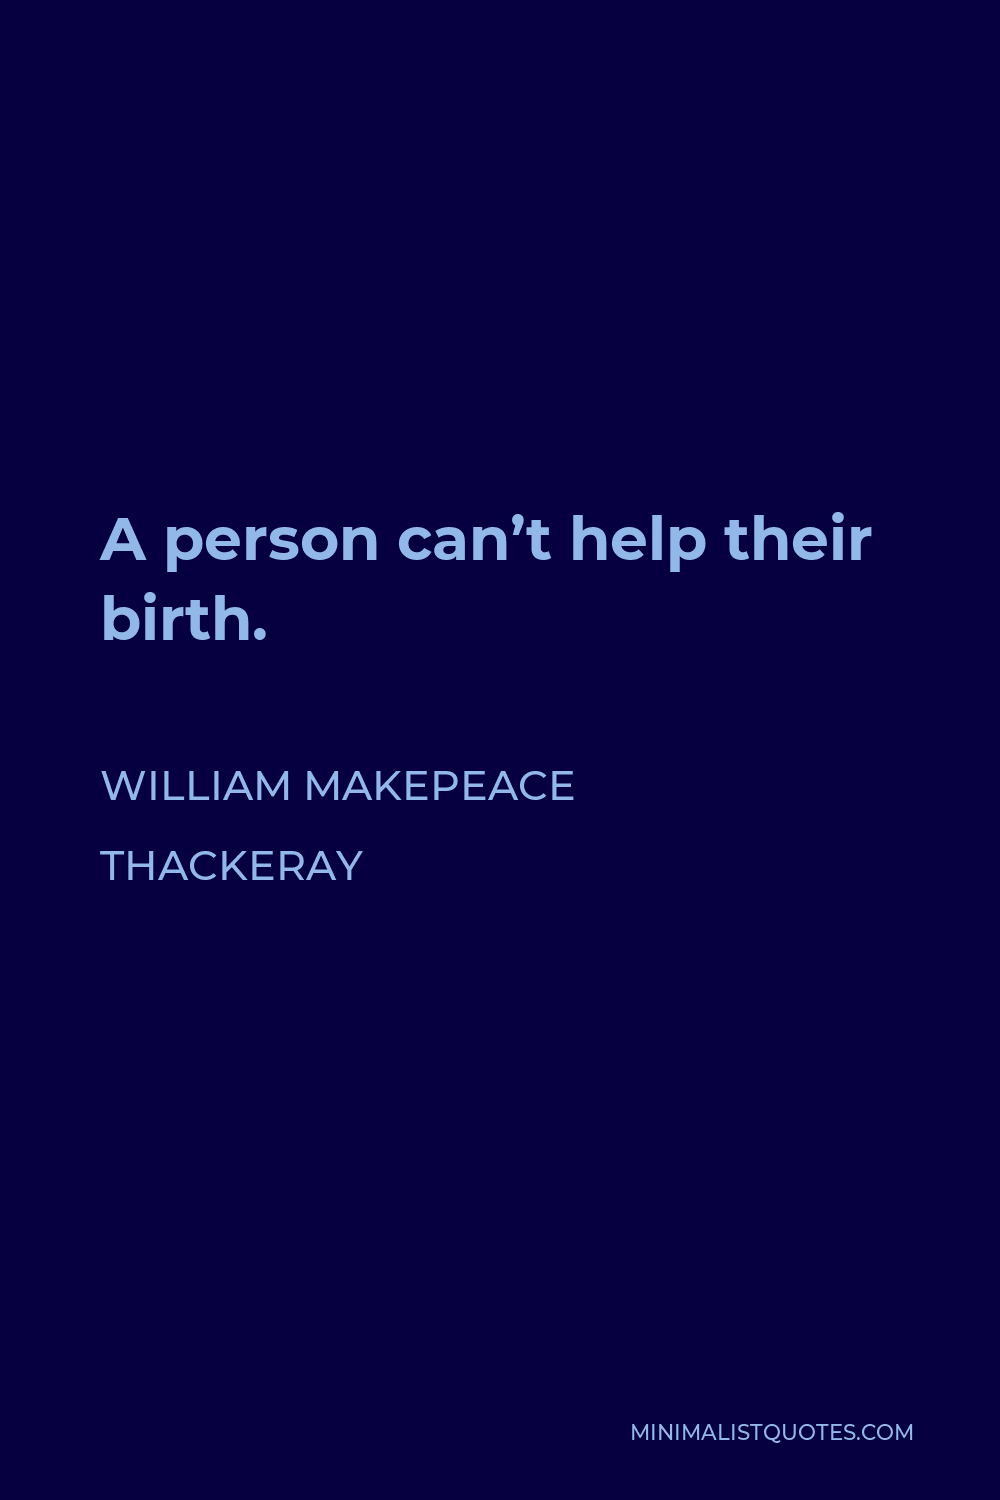 William Makepeace Thackeray Quote - A person can’t help their birth.